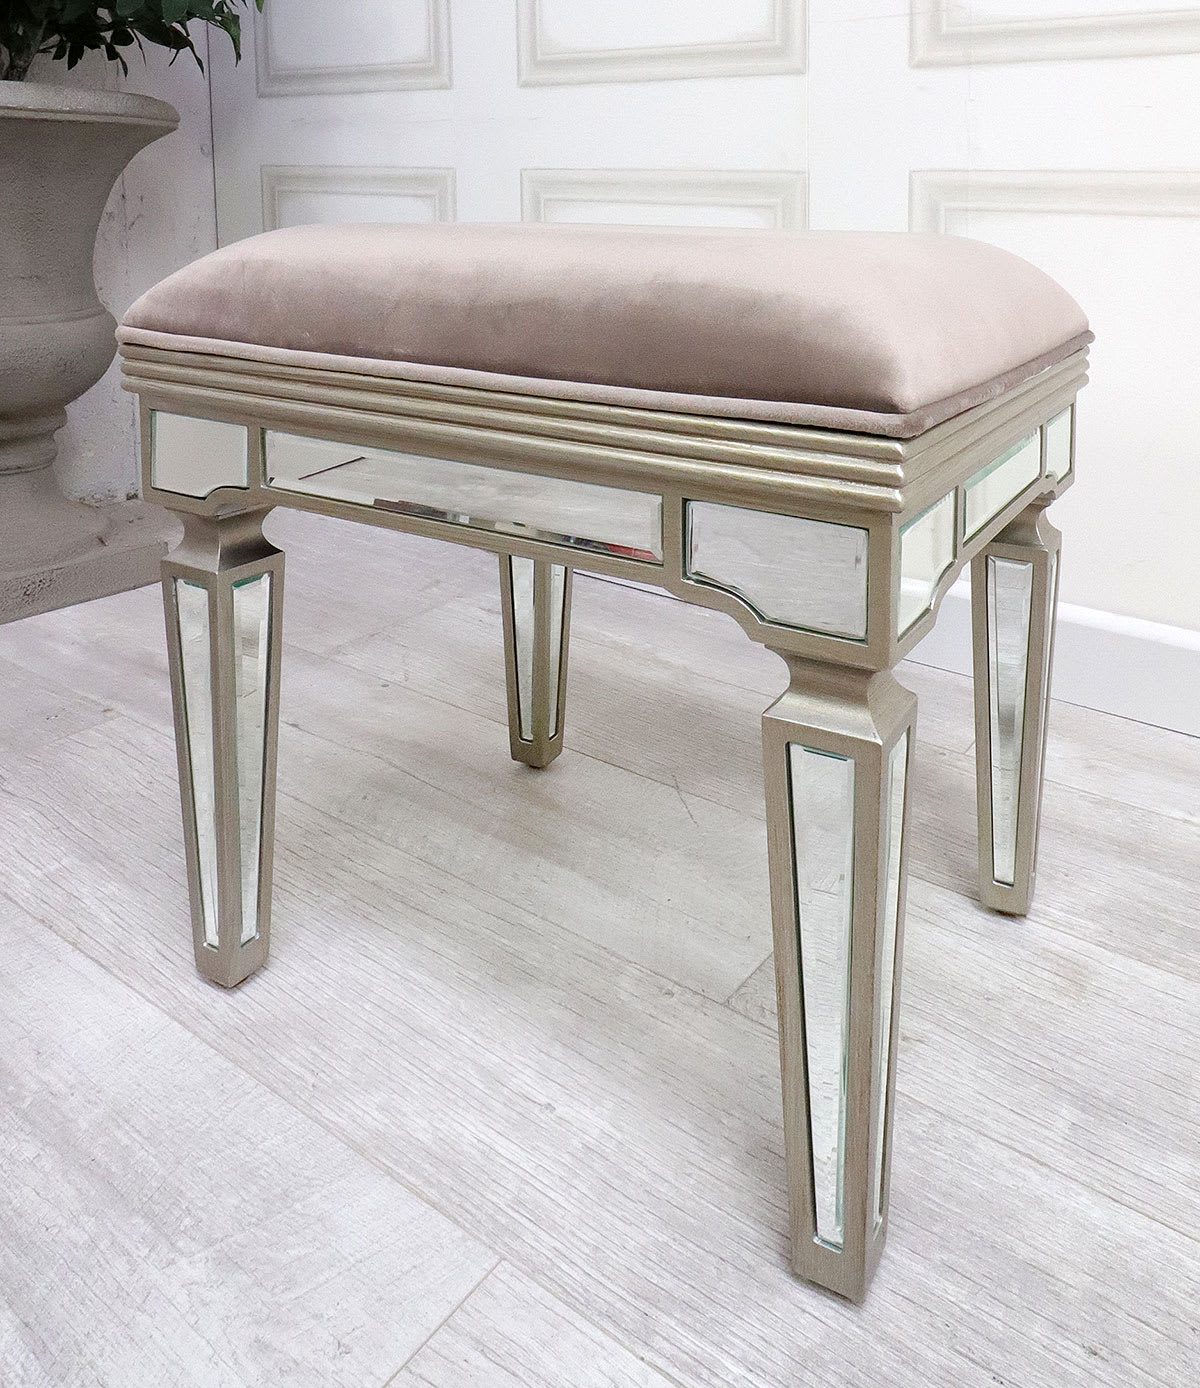 Florida Mirrored Glass with Champagne Stool